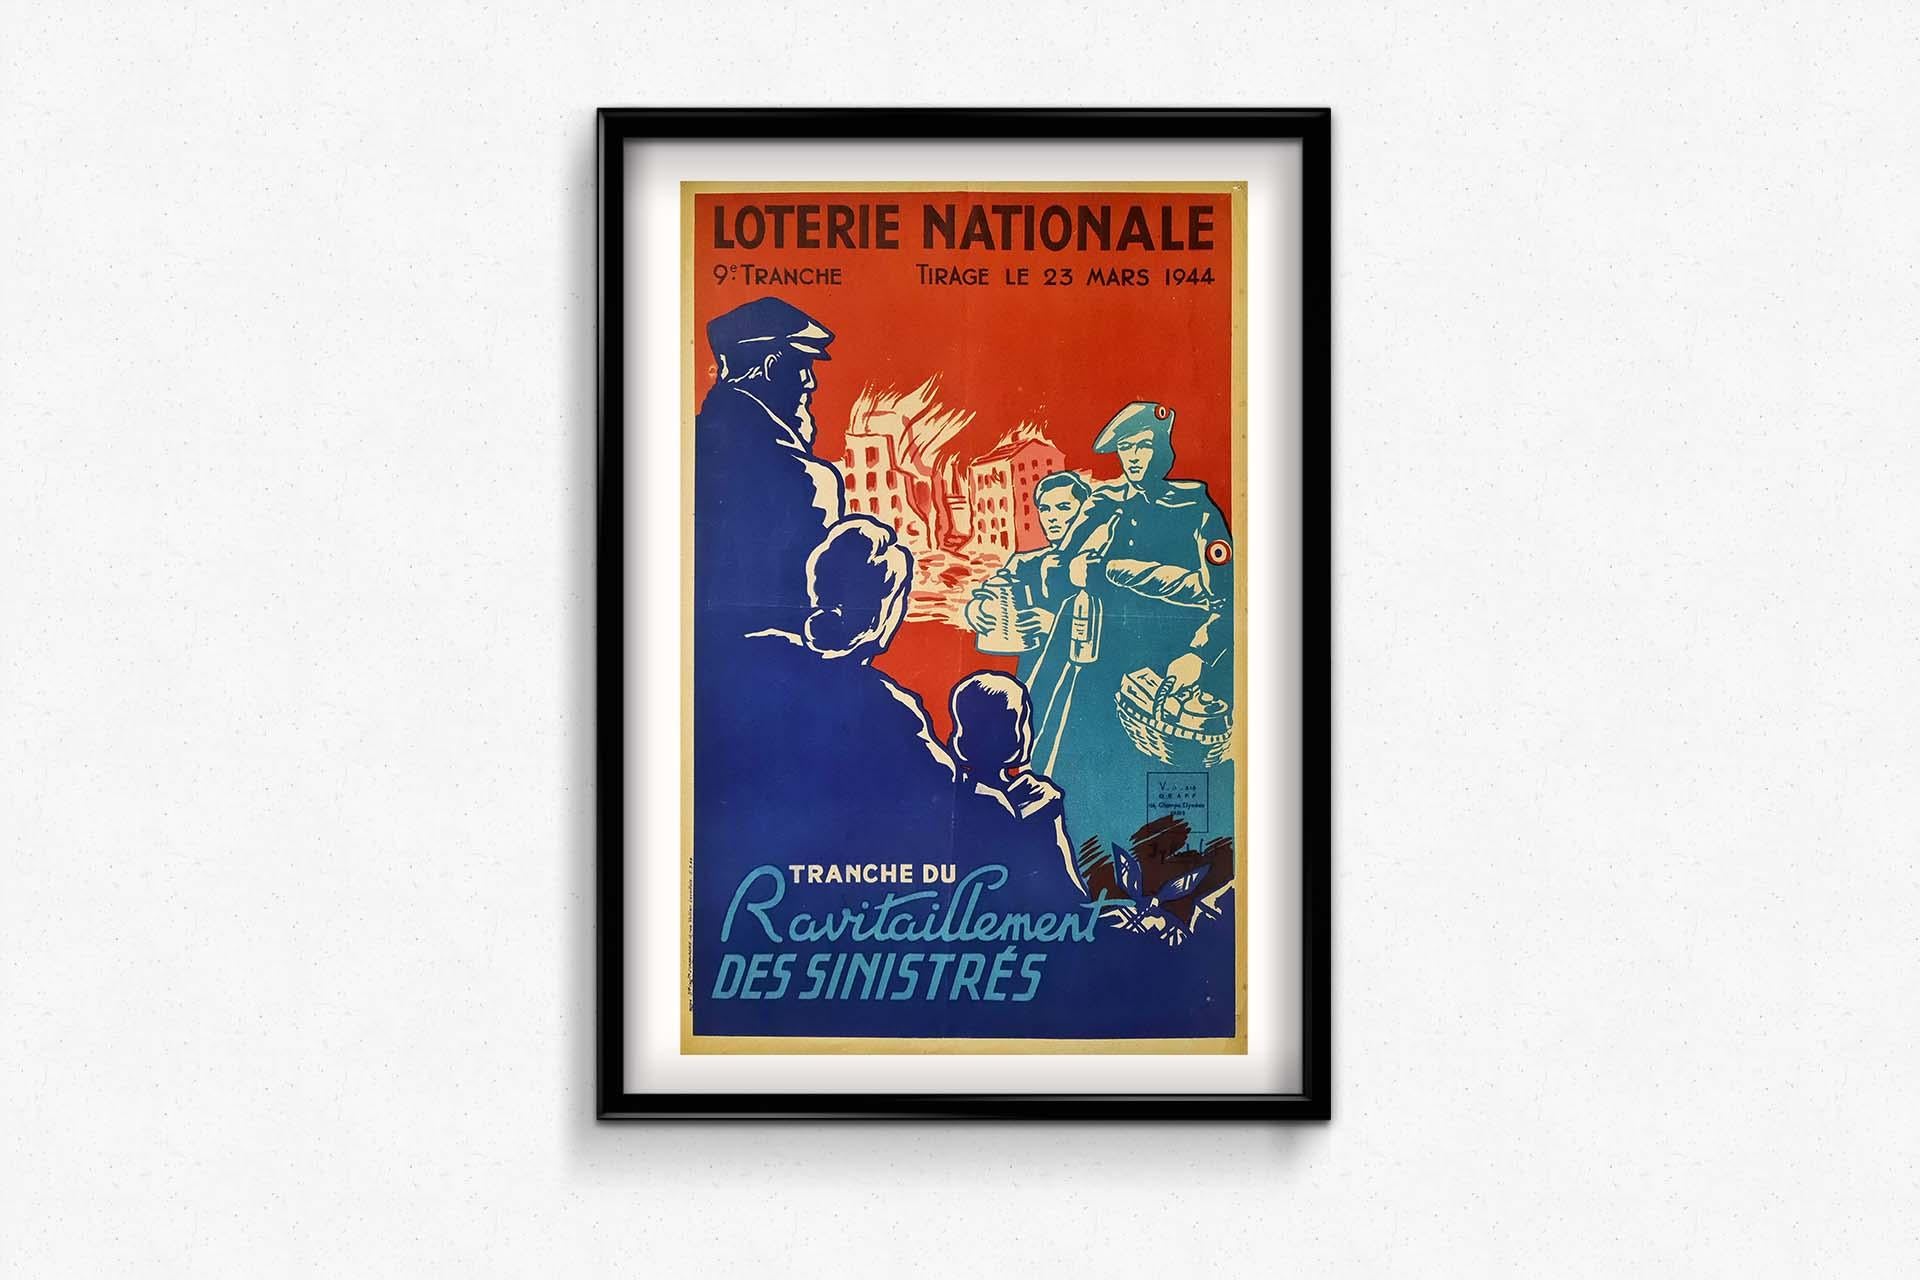 Beautiful poster for the national lottery and the slice of the supply of the disaster victims in 1944.

The French National Lottery is the distant heir of the Royal Lottery of France, which was managed by the General Administration of